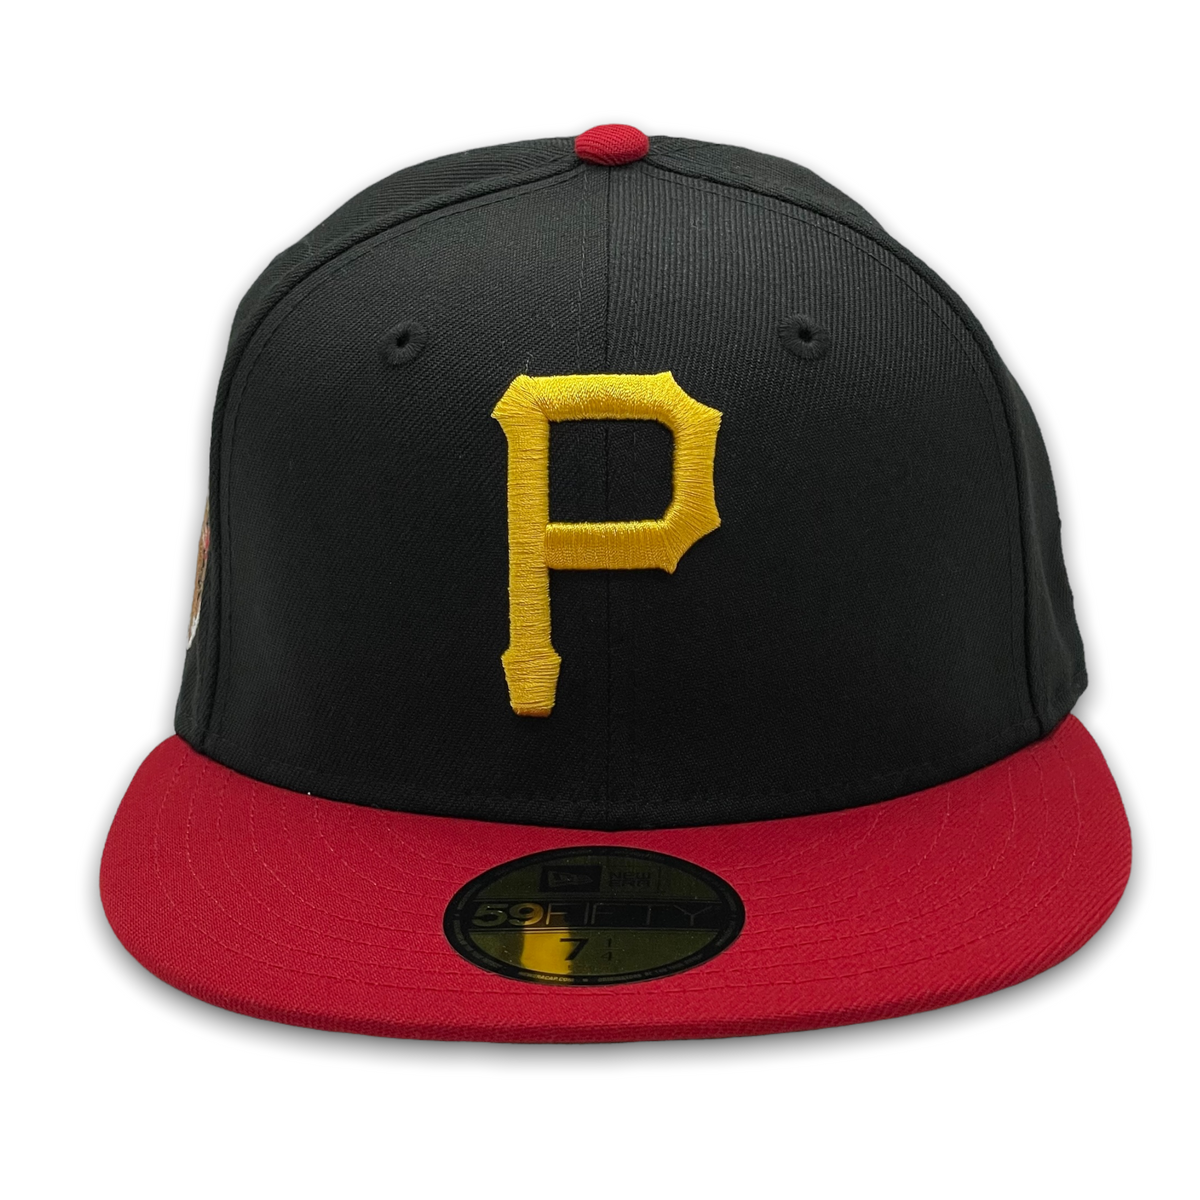 PITTSBURGH PIRATES 1959 ALL STAR GAME BLACK BUTTER POPCORN YELLOW